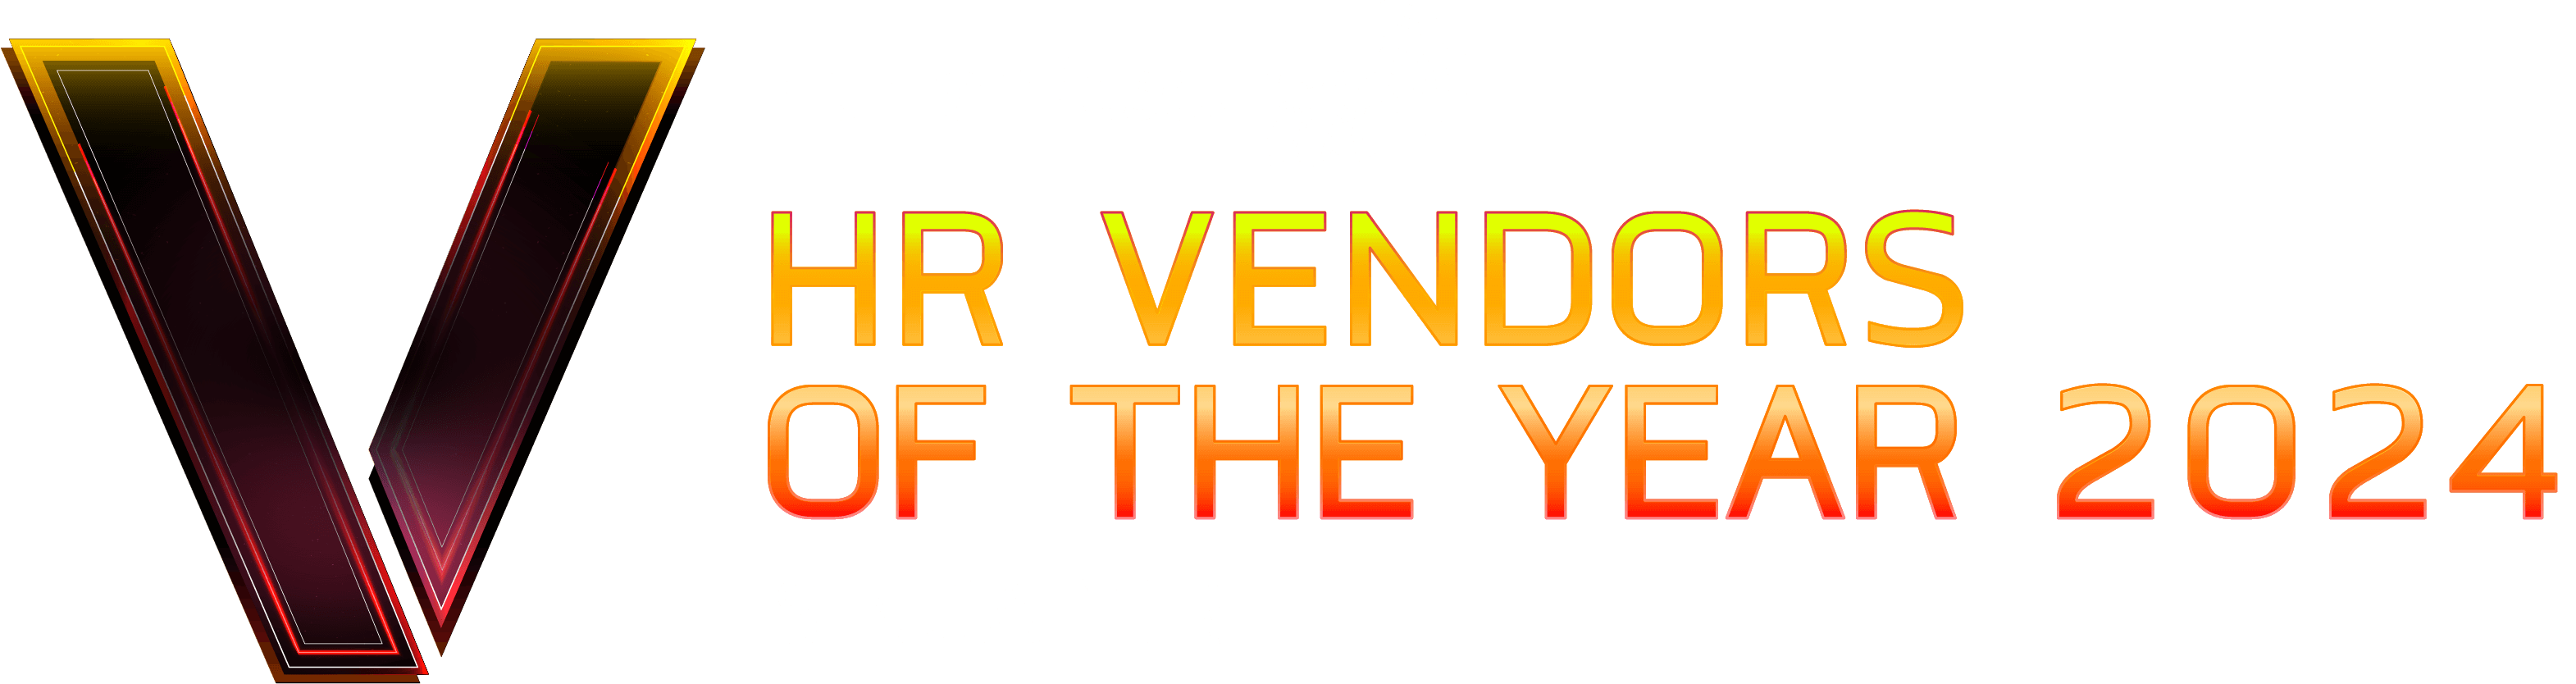 HR Vendors of the Year awards 2024 Singapore